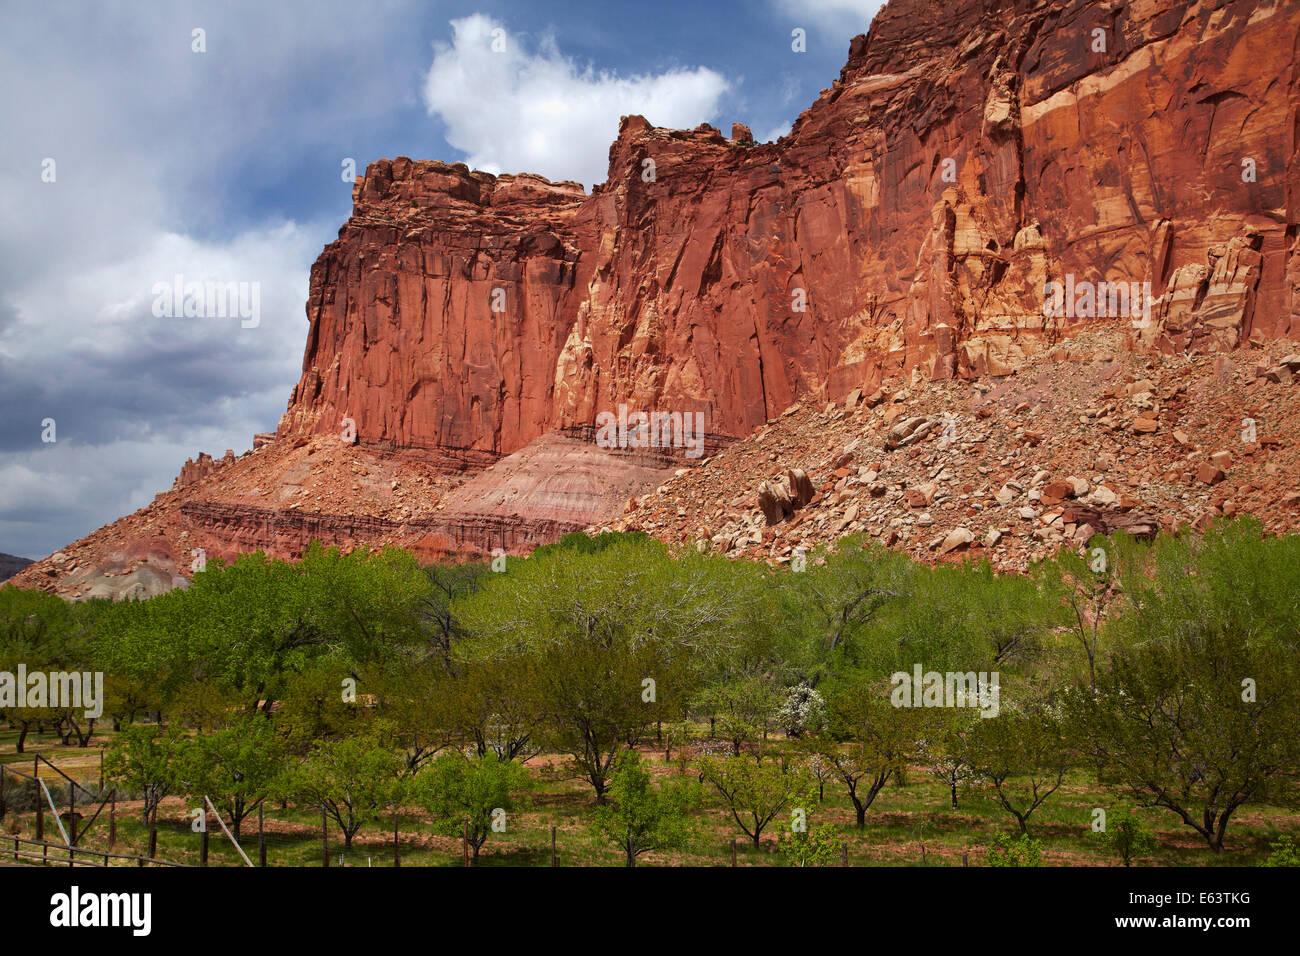 Historic orchards and sandstone cliffs at Fruita, Capitol Reef National Park, Utah, USA Stock Photo